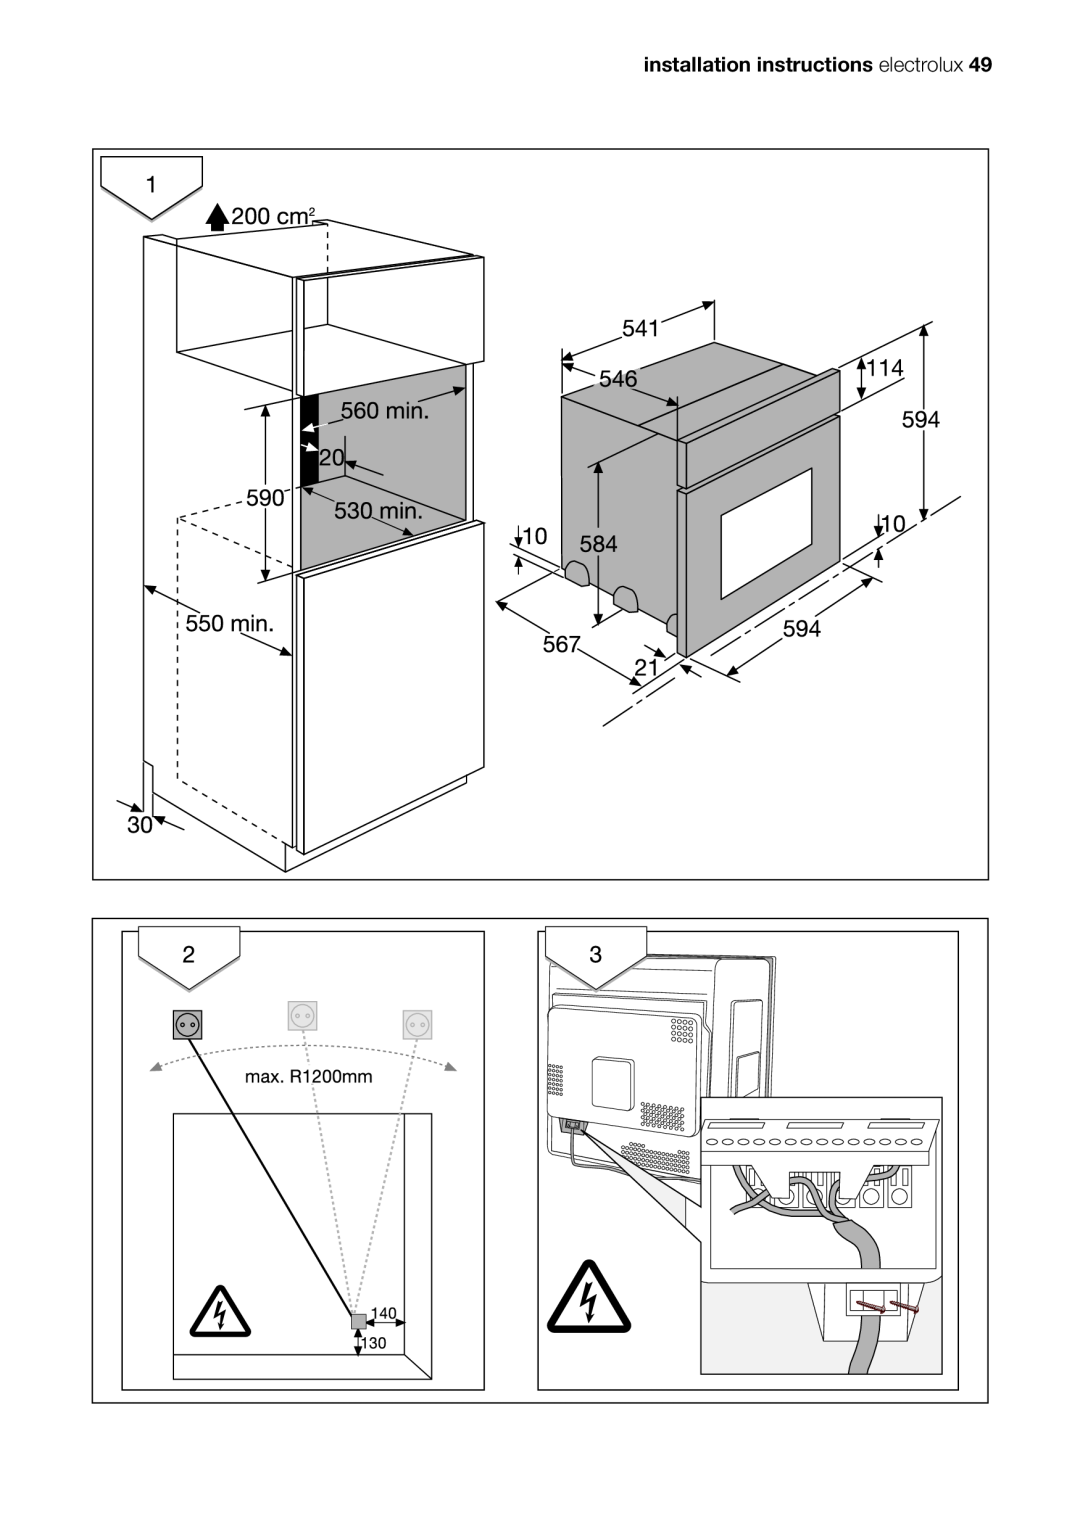 Electrolux EOB53000 user manual installation instructions electrolux 